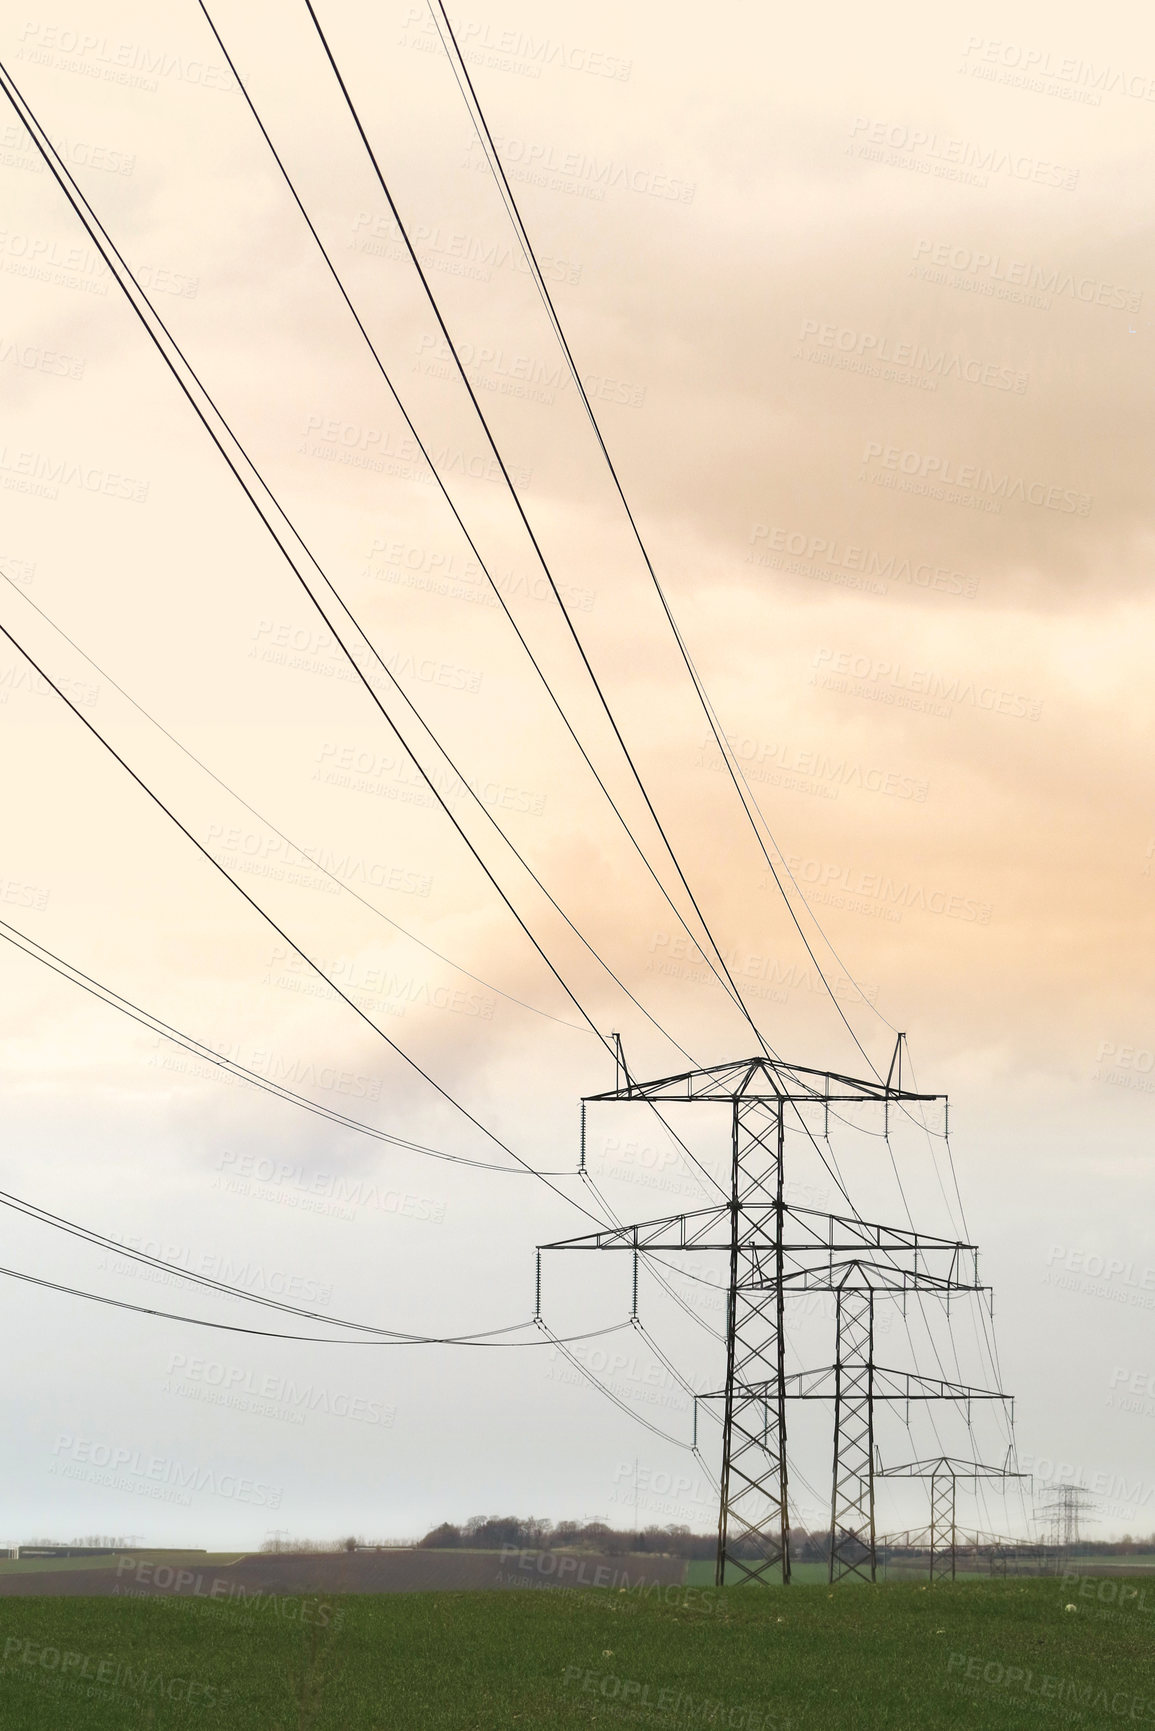 Buy stock photo View of electricity cables running over a field against a cloudy sky outside. Group of power lines and pylons providing rural and remote areas with power. Electrical transmission and distribution 